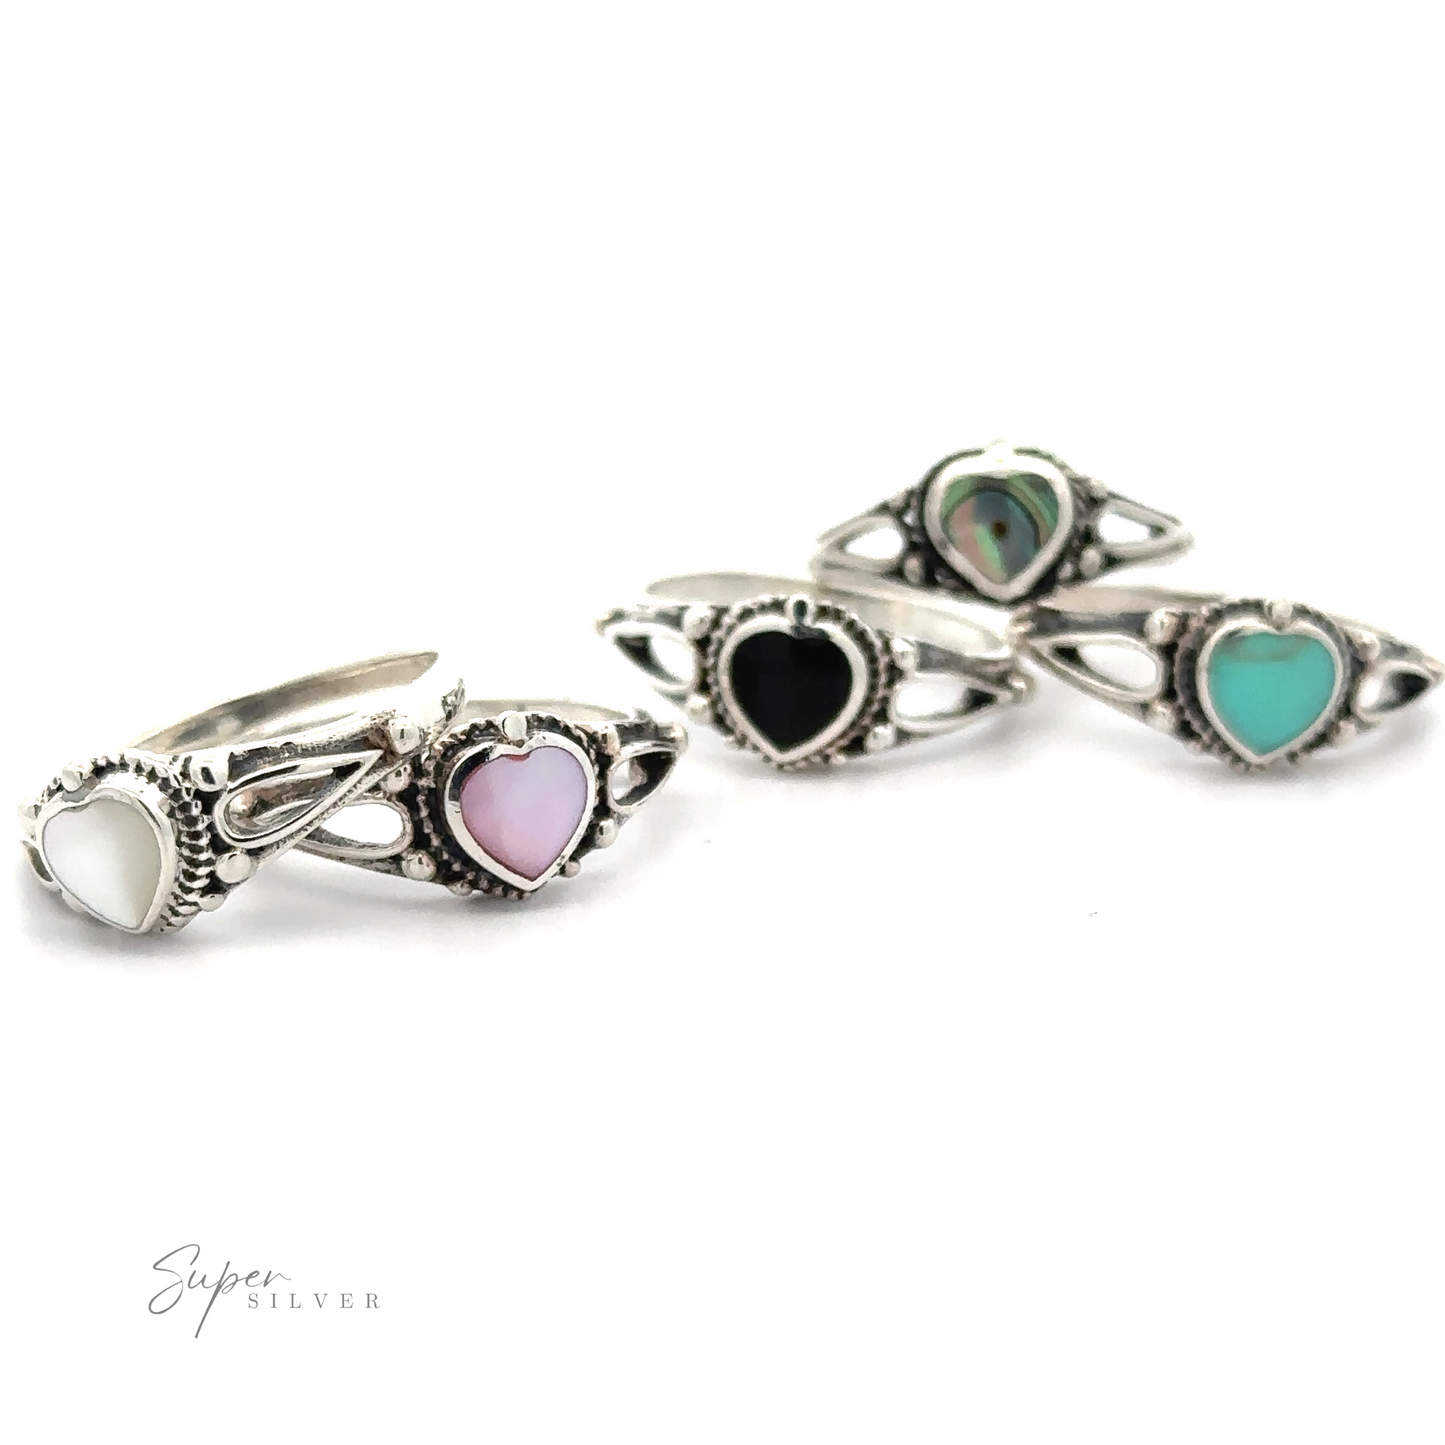 A collection of silver rings with various colored Inlaid Stone Heart Rings.